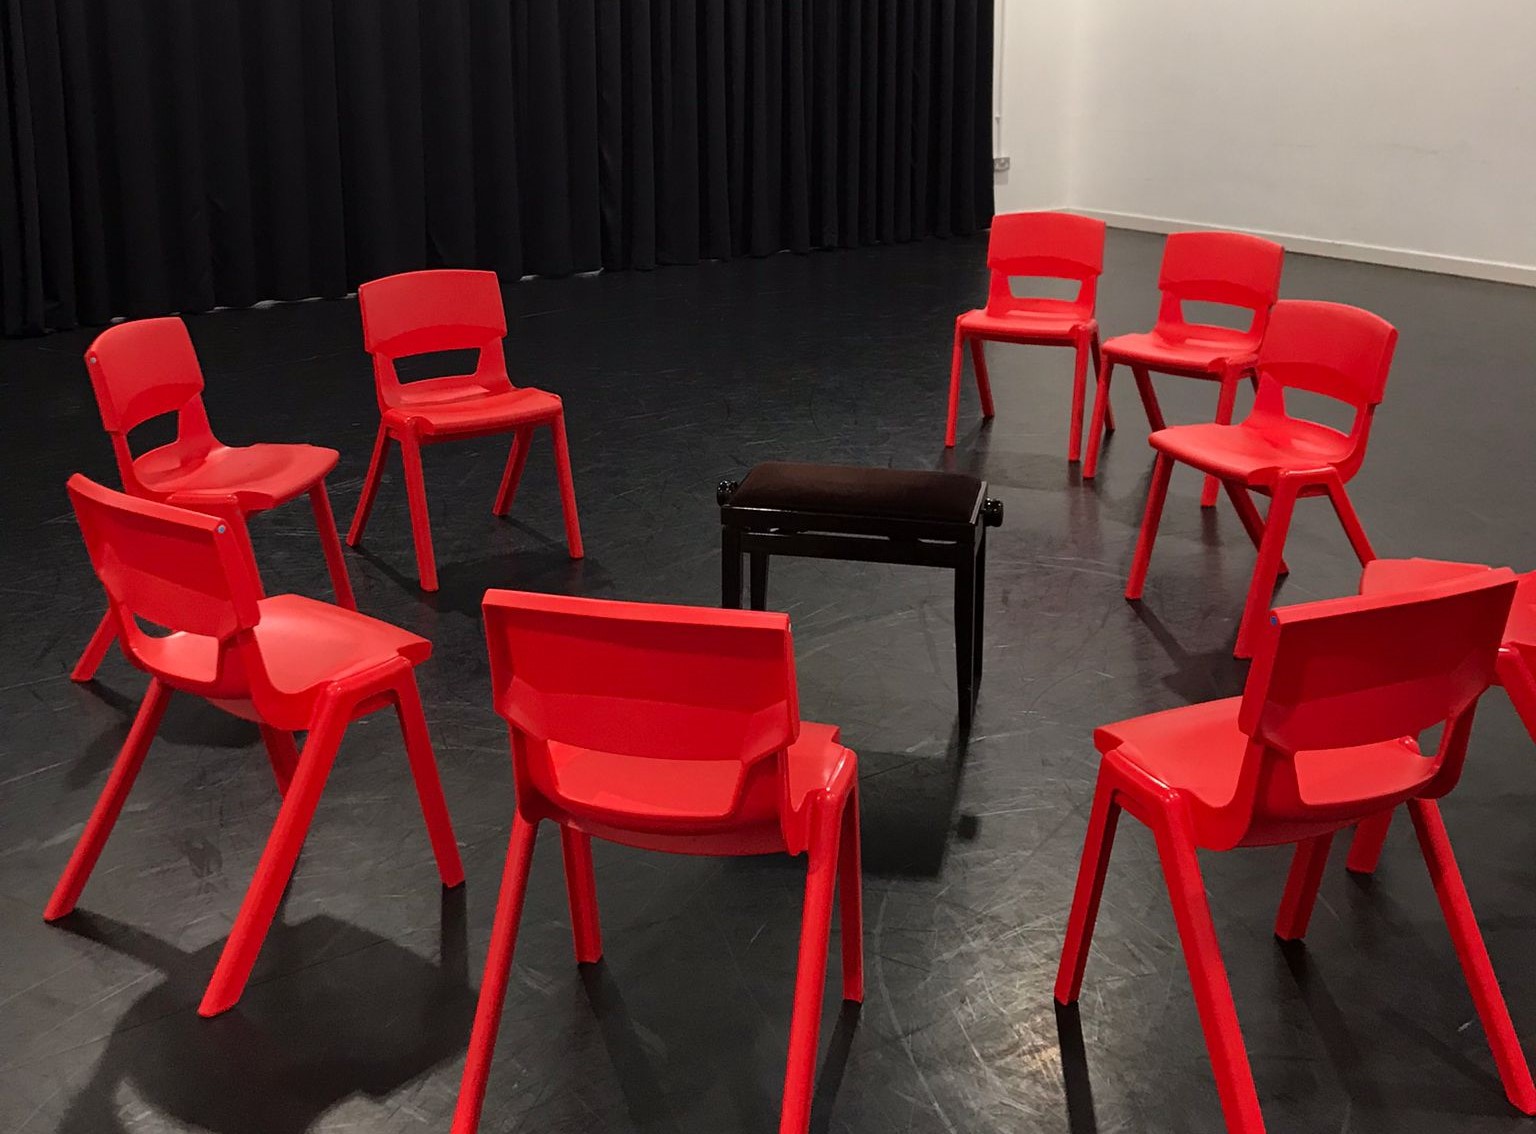 Photo of a circle of chairs to be used for a focus group